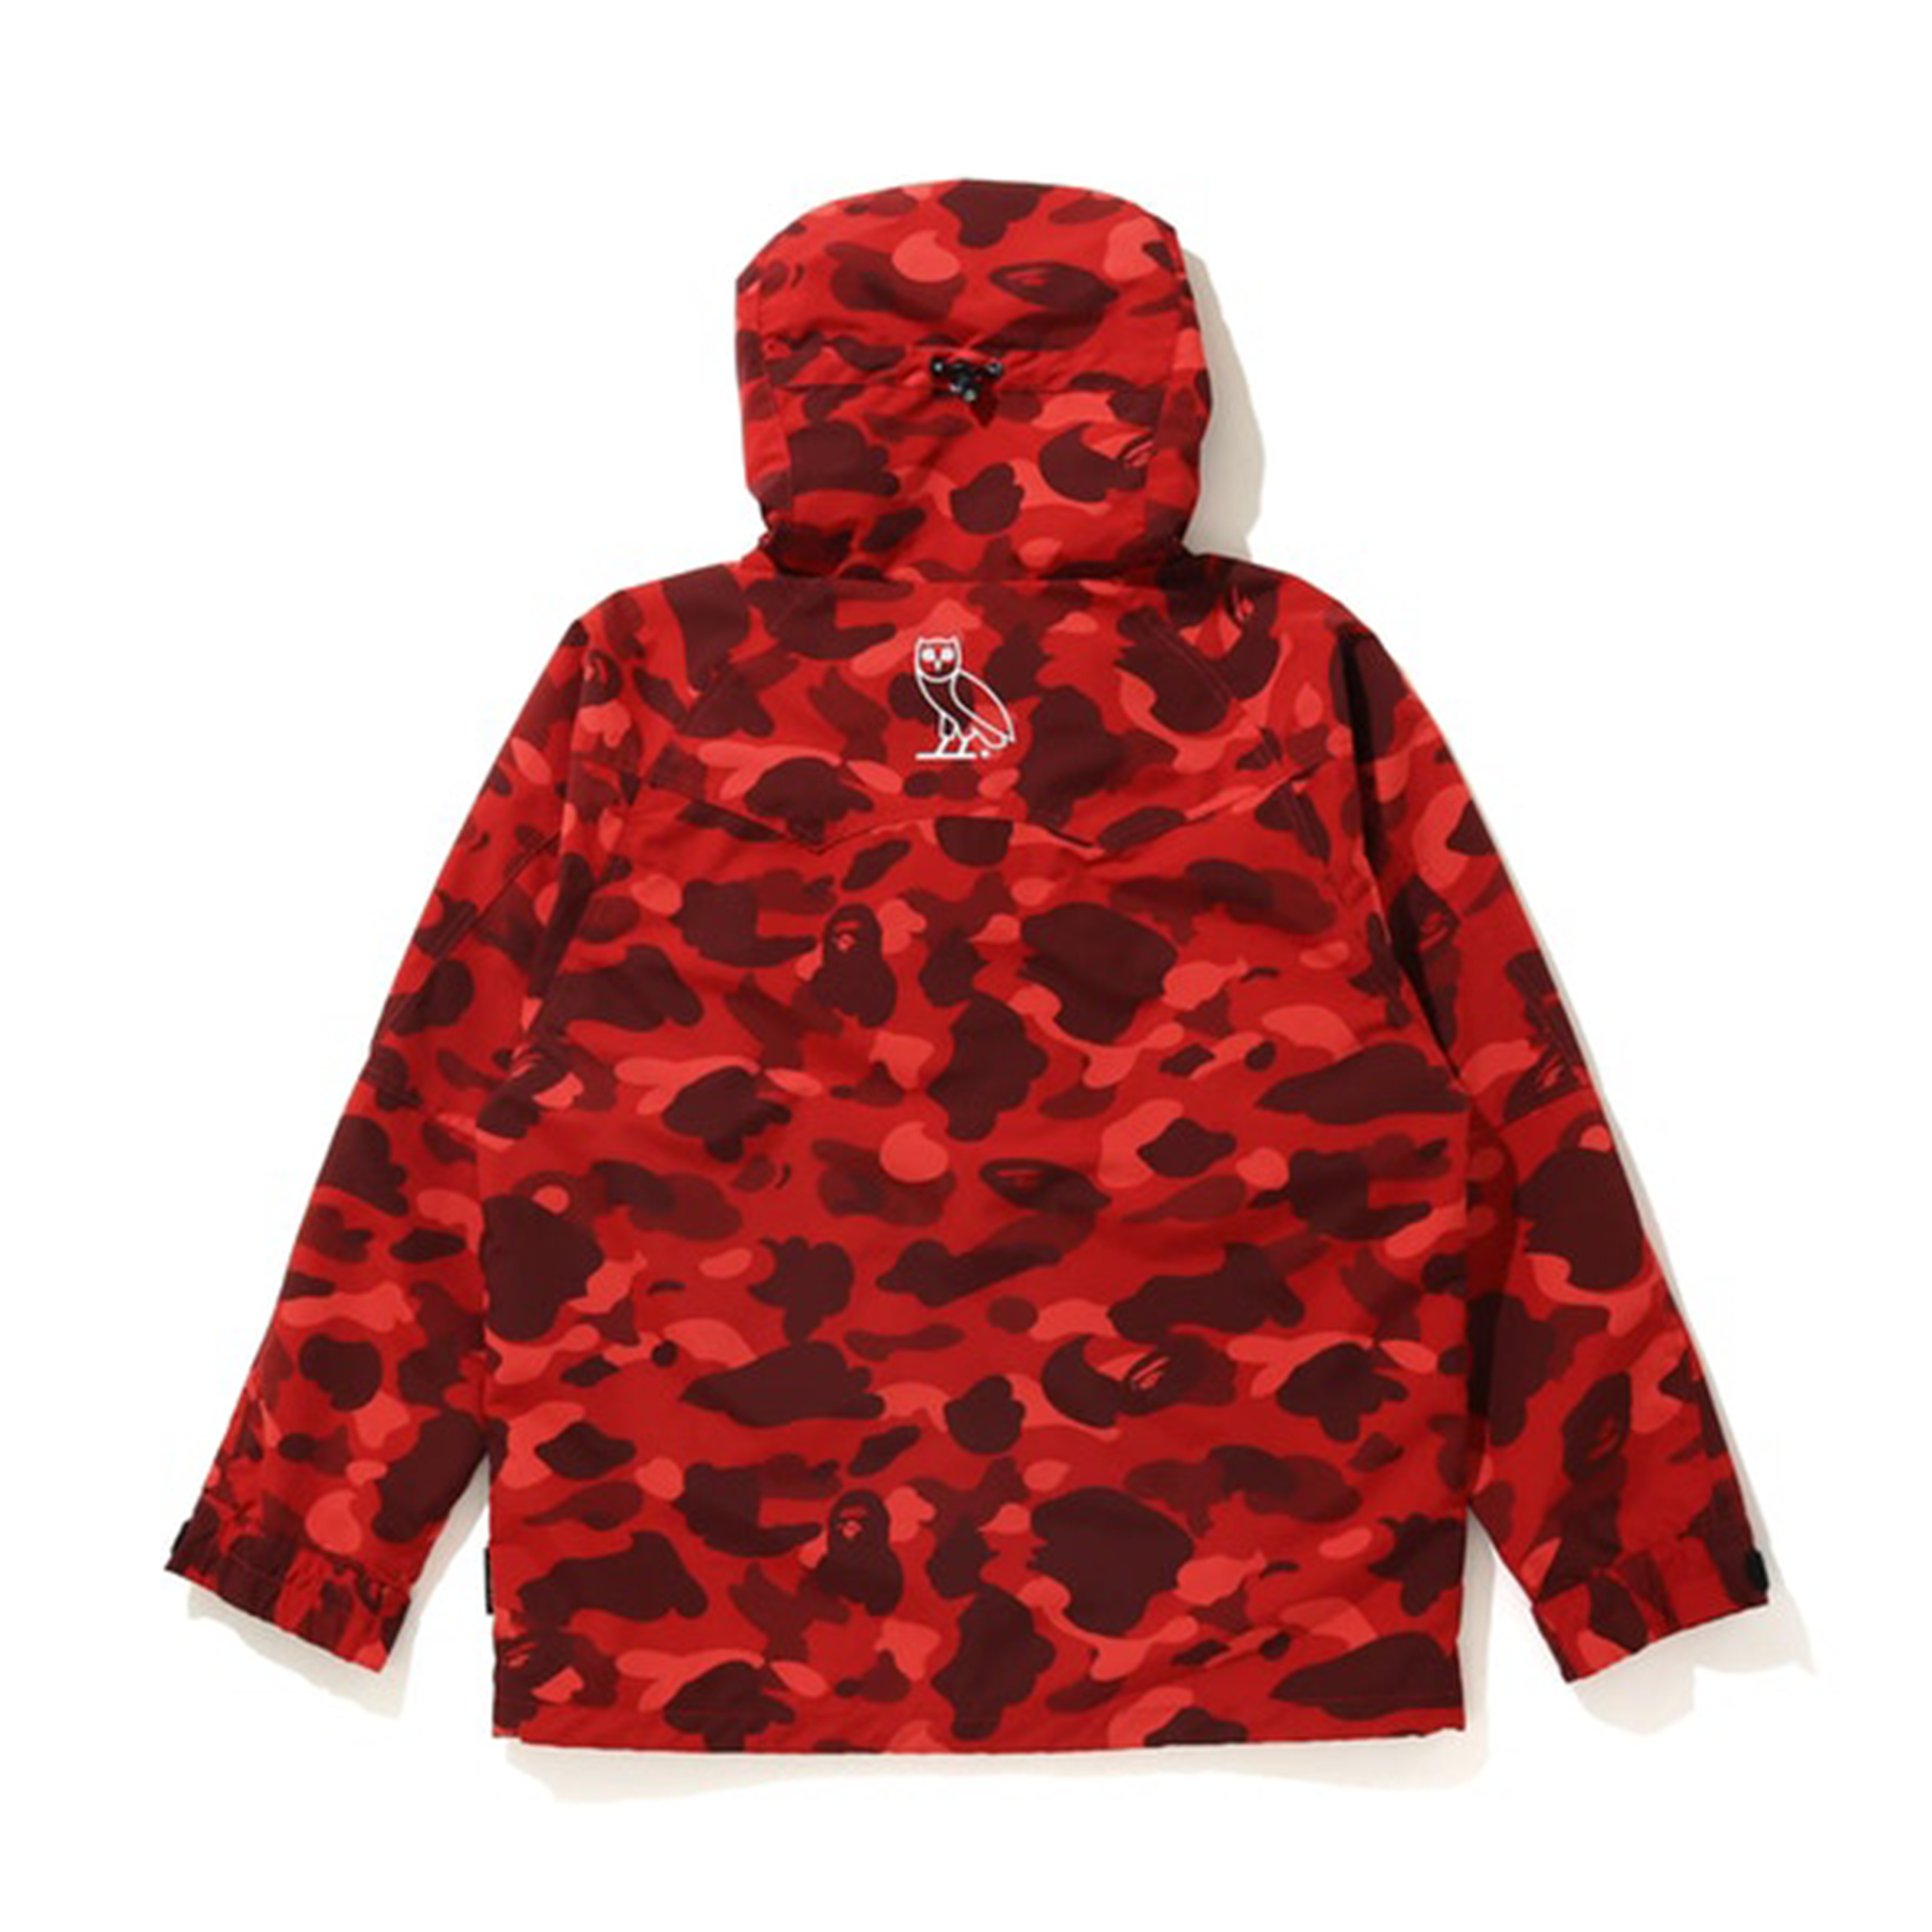 Red Camo Jacket